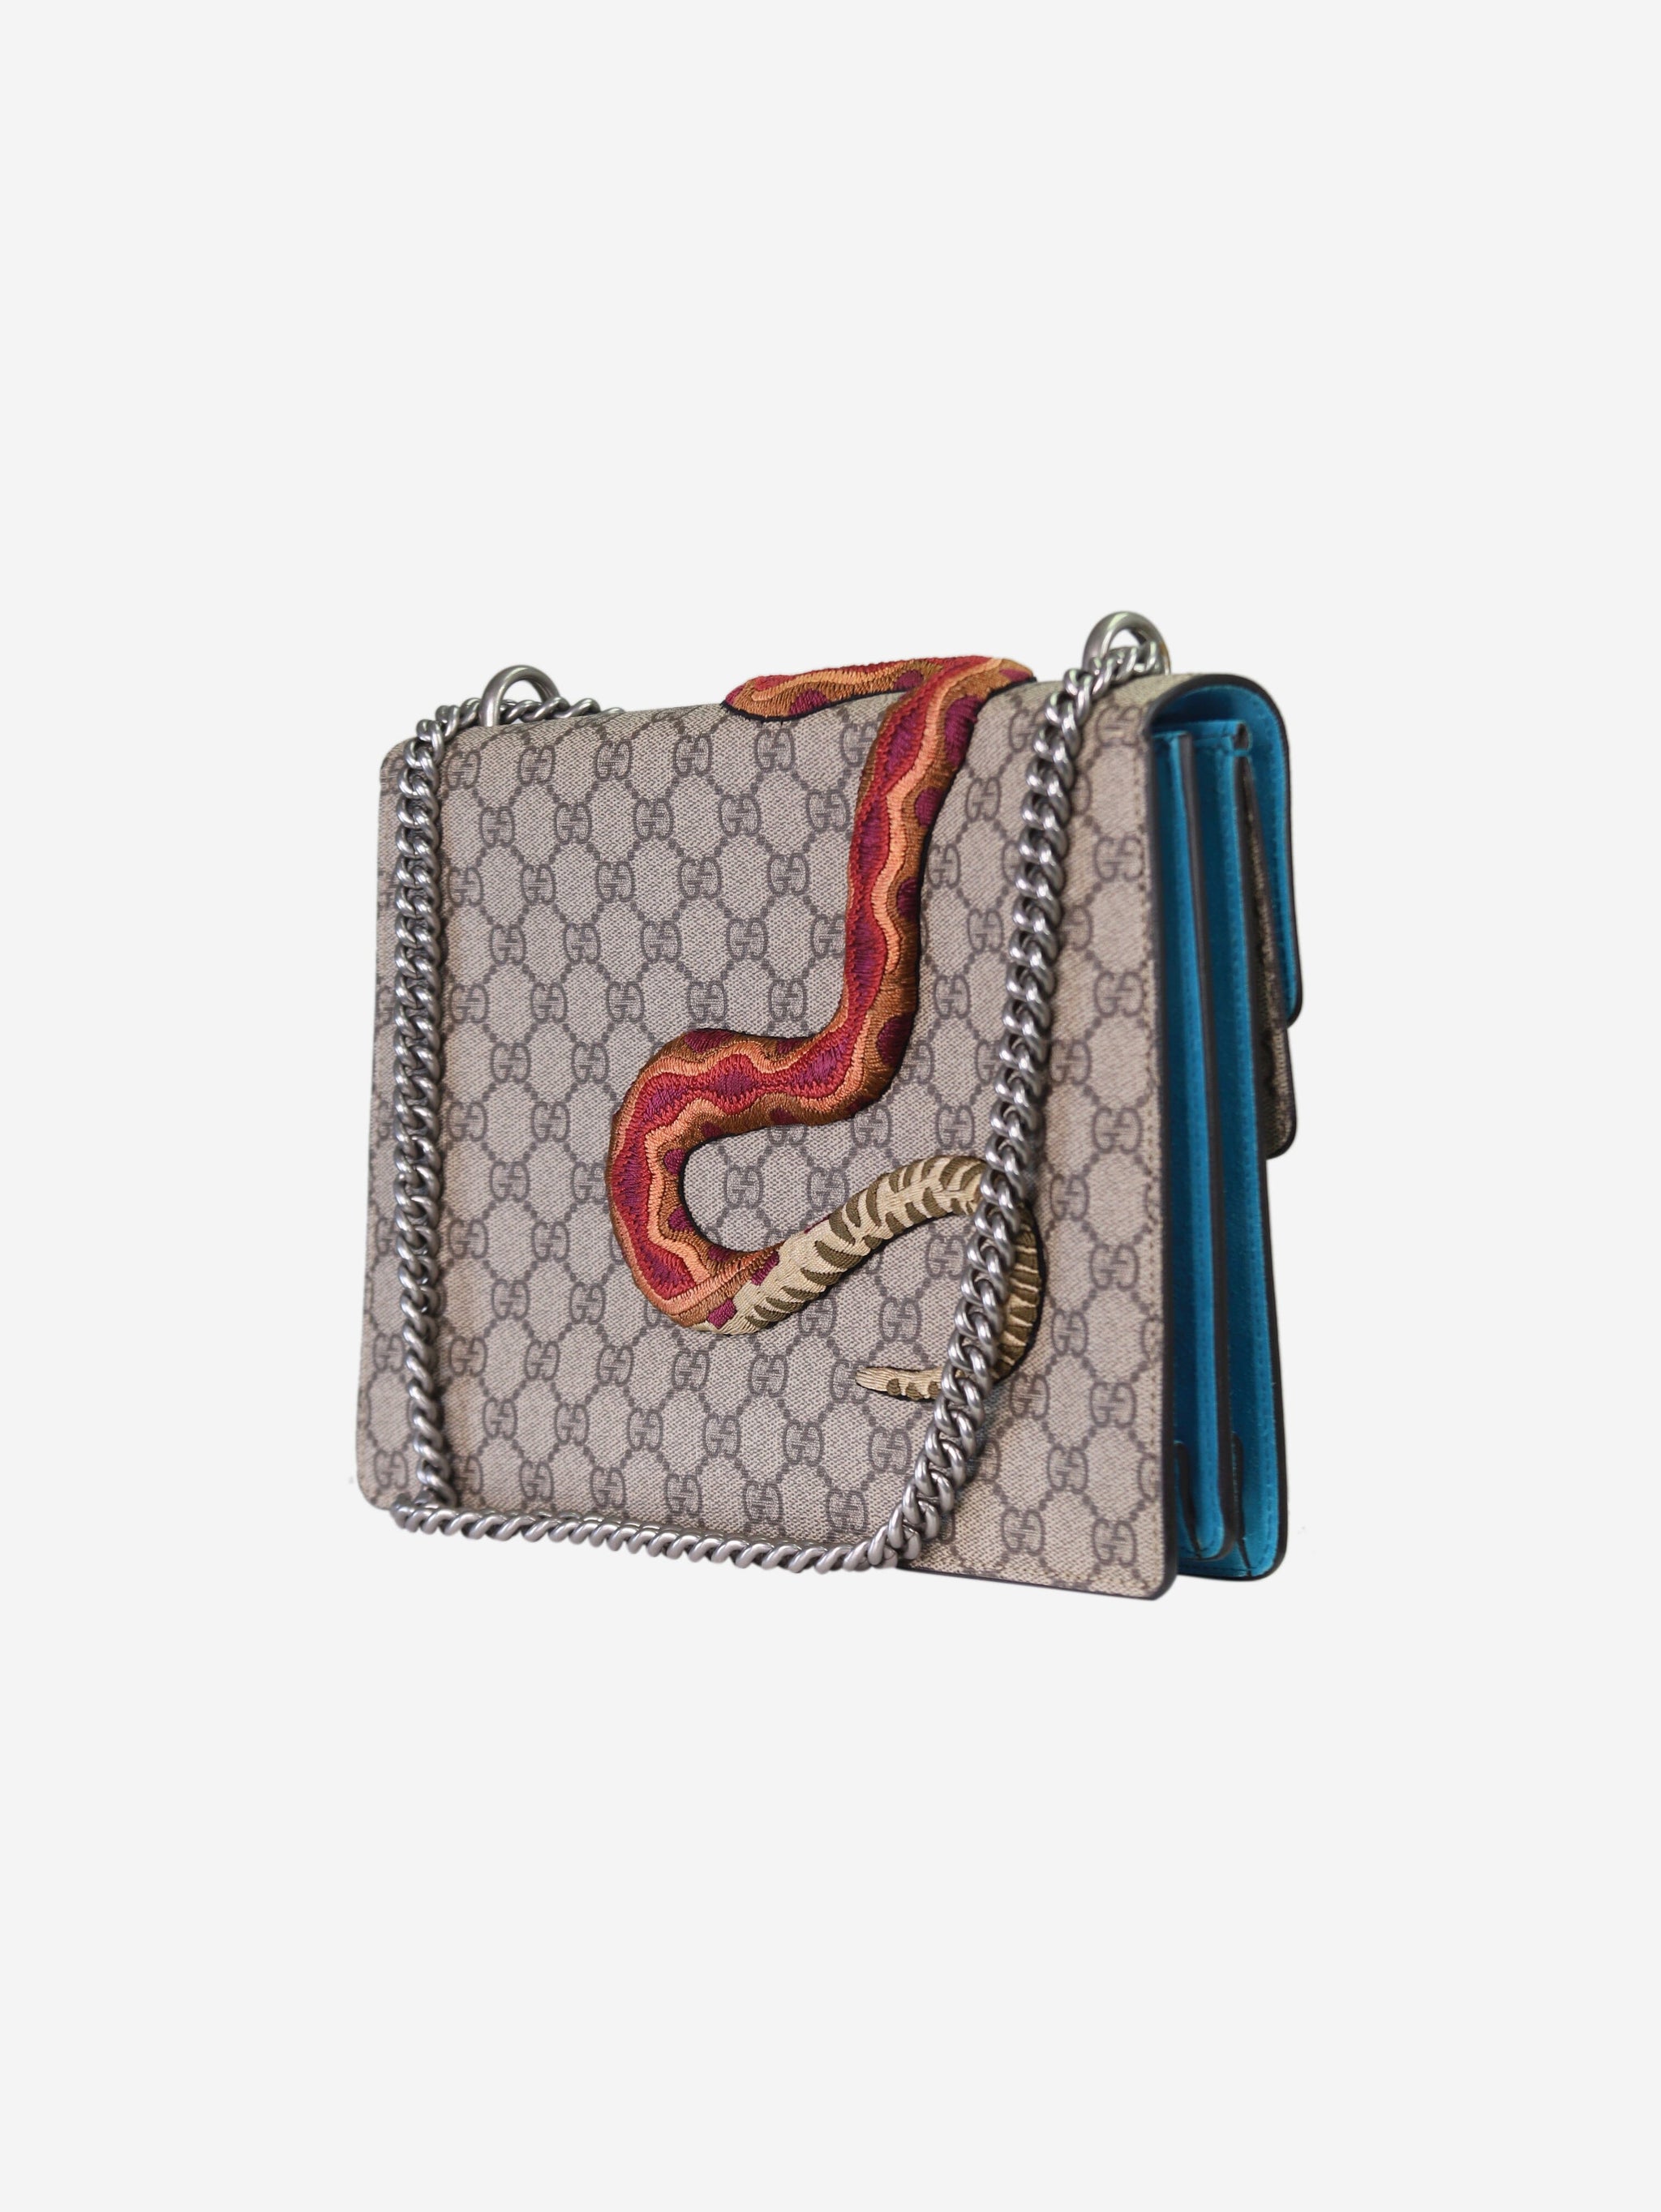 Gucci, Givenchy, and Balenciaga Get in on the Snake Trend | GQ